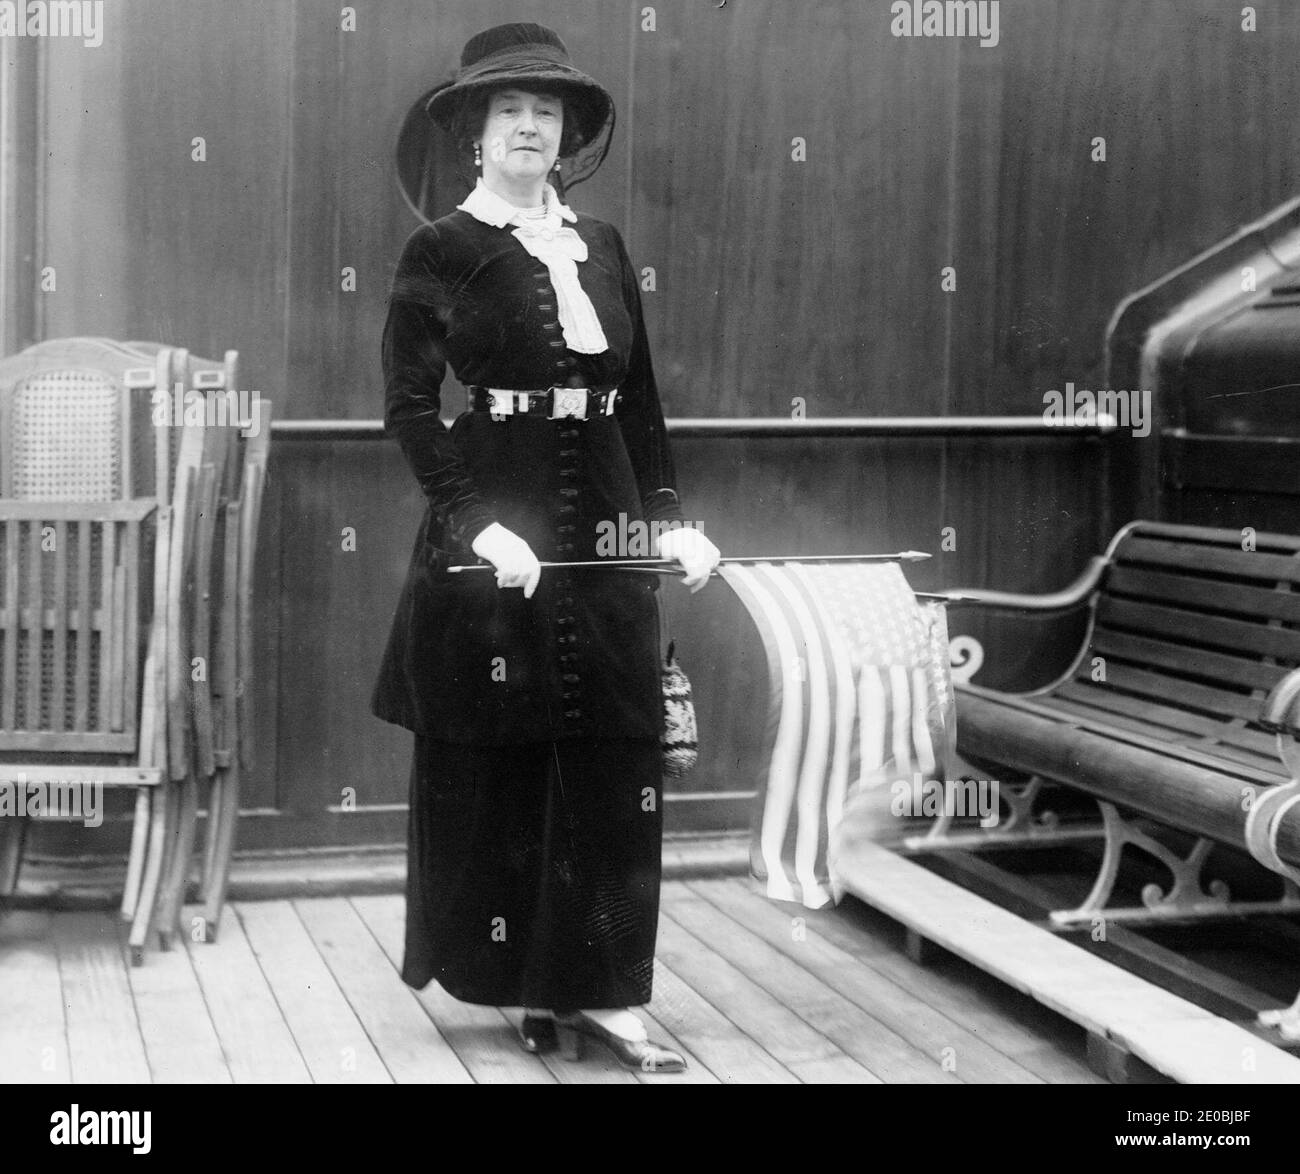 The photograph of Lady Duff Gordon, a first-class passenger onboard Titanic is on display at 'Titanic, Return to Cherbourg' exhibition, at Cite de la Mer Museum in Cherbourg, western France in March 2012. The exhibition marking the 100th anniversary of the sinking of Titanic on April 14, 1912 is to open in April 2012.Titanic was built by Harland & Wolff in Belfast Ireland during 1910-1911 and later sank on April 15th, 1912 off the coast of New Foundland after striking an iceberg during her maiden voyage from Southampton, England to New York, USA, with the loss of 1,522 passengers and crew. Pho Stock Photo